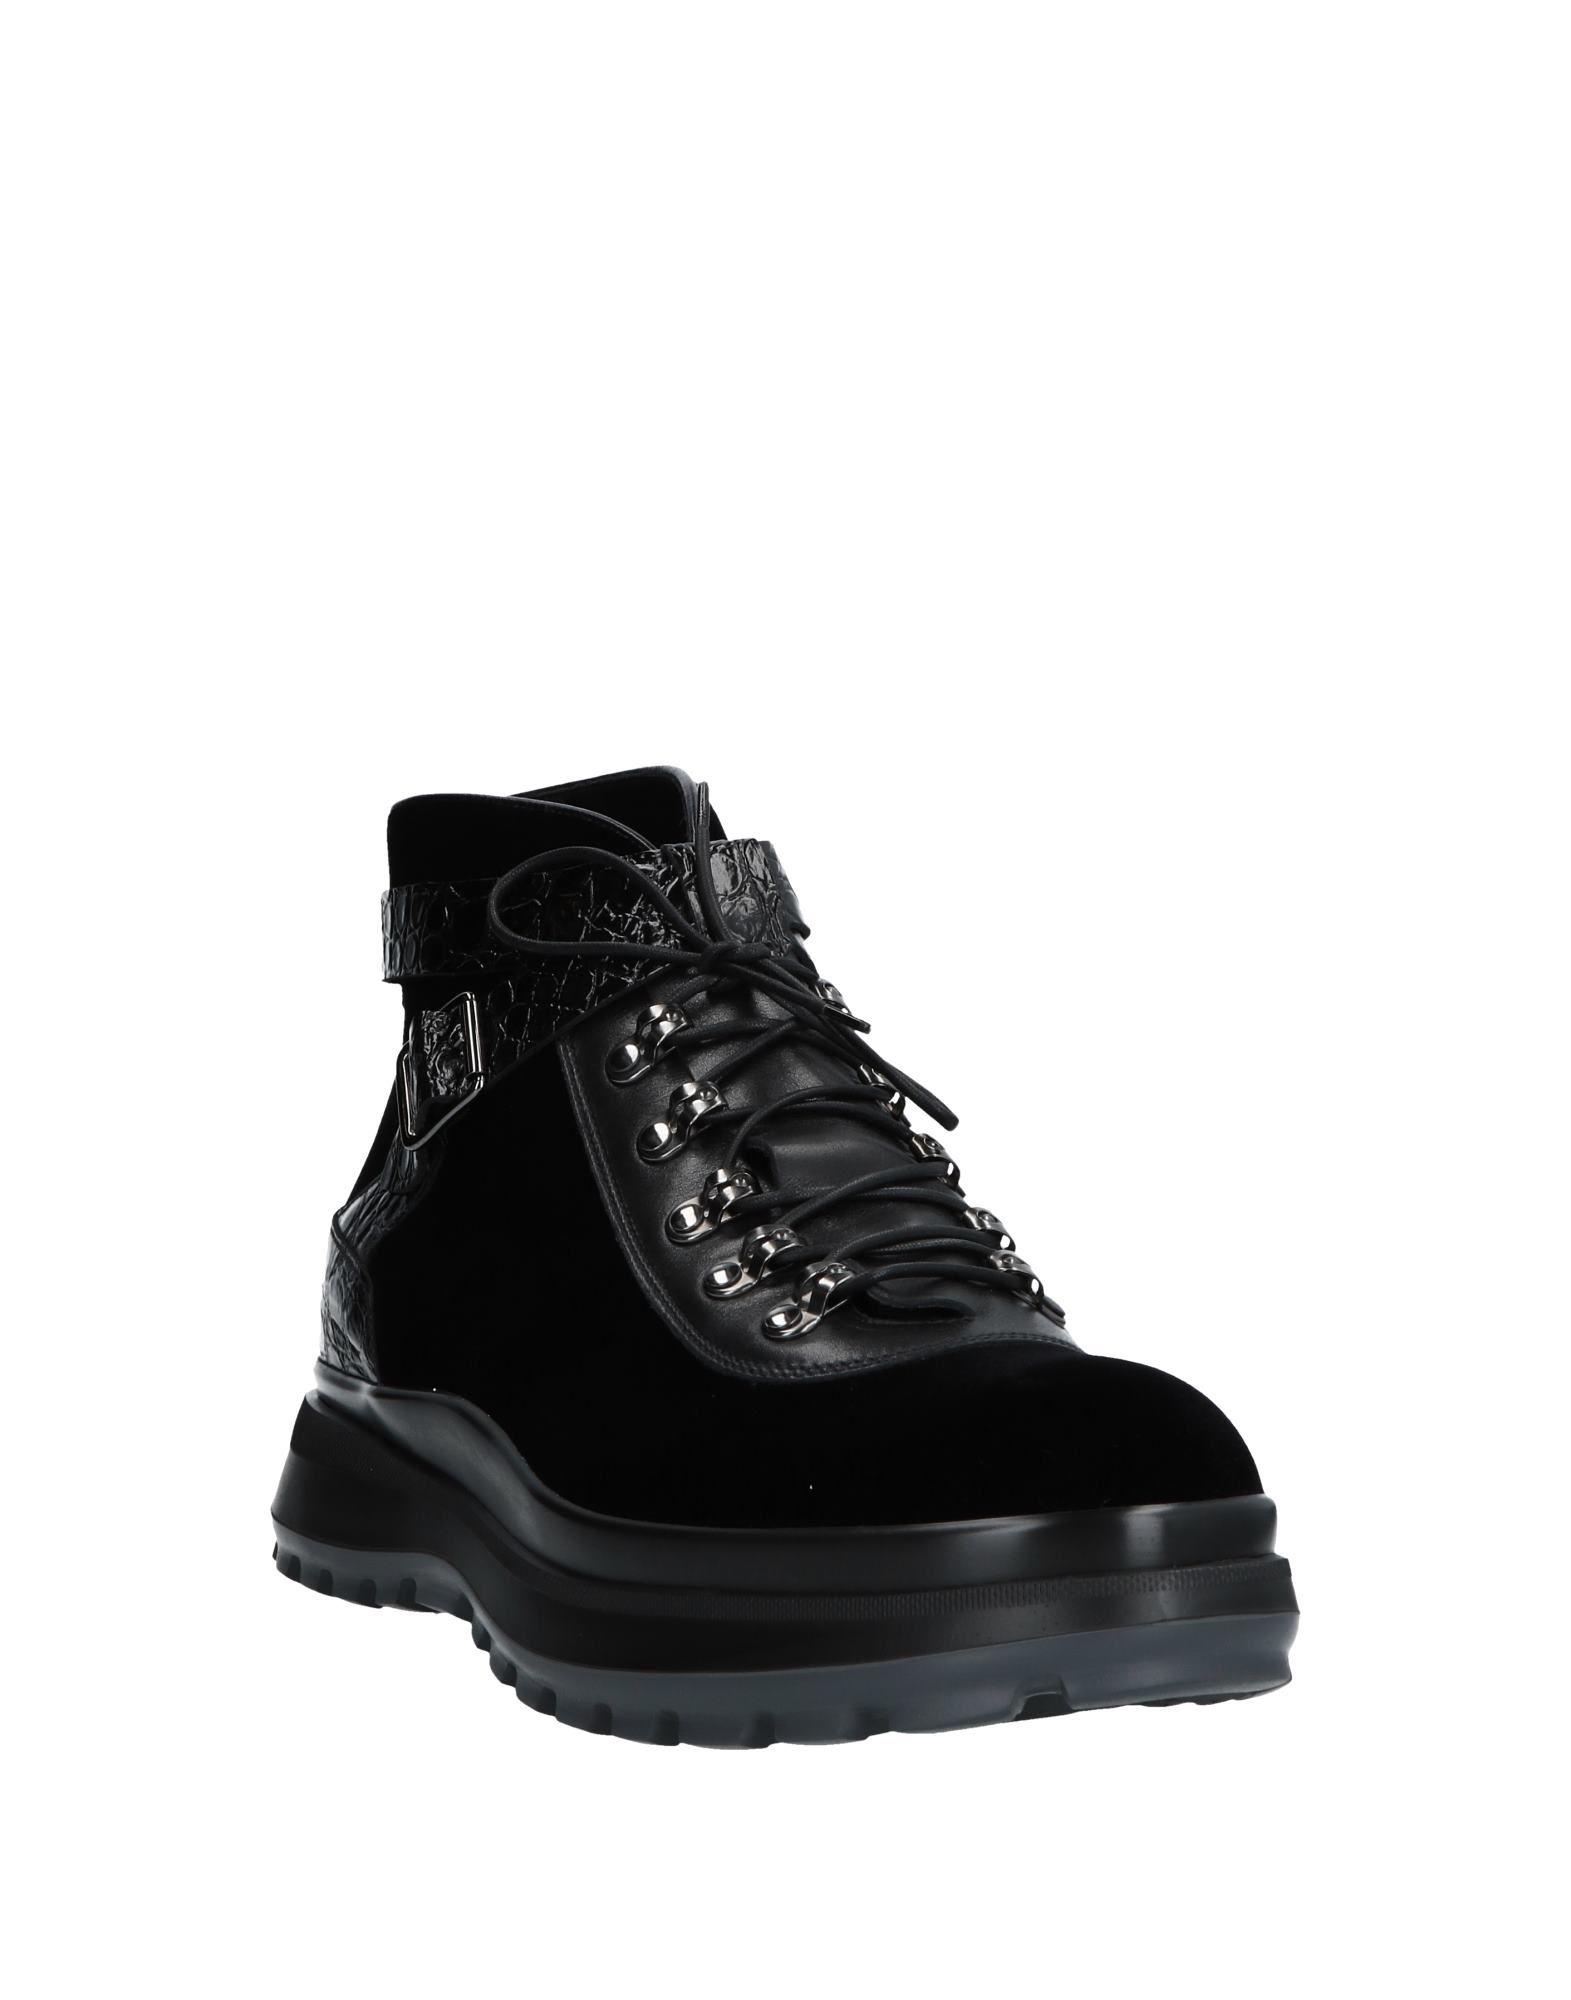 Giorgio Armani Leather High-tops & Sneakers in Black for Men - Lyst